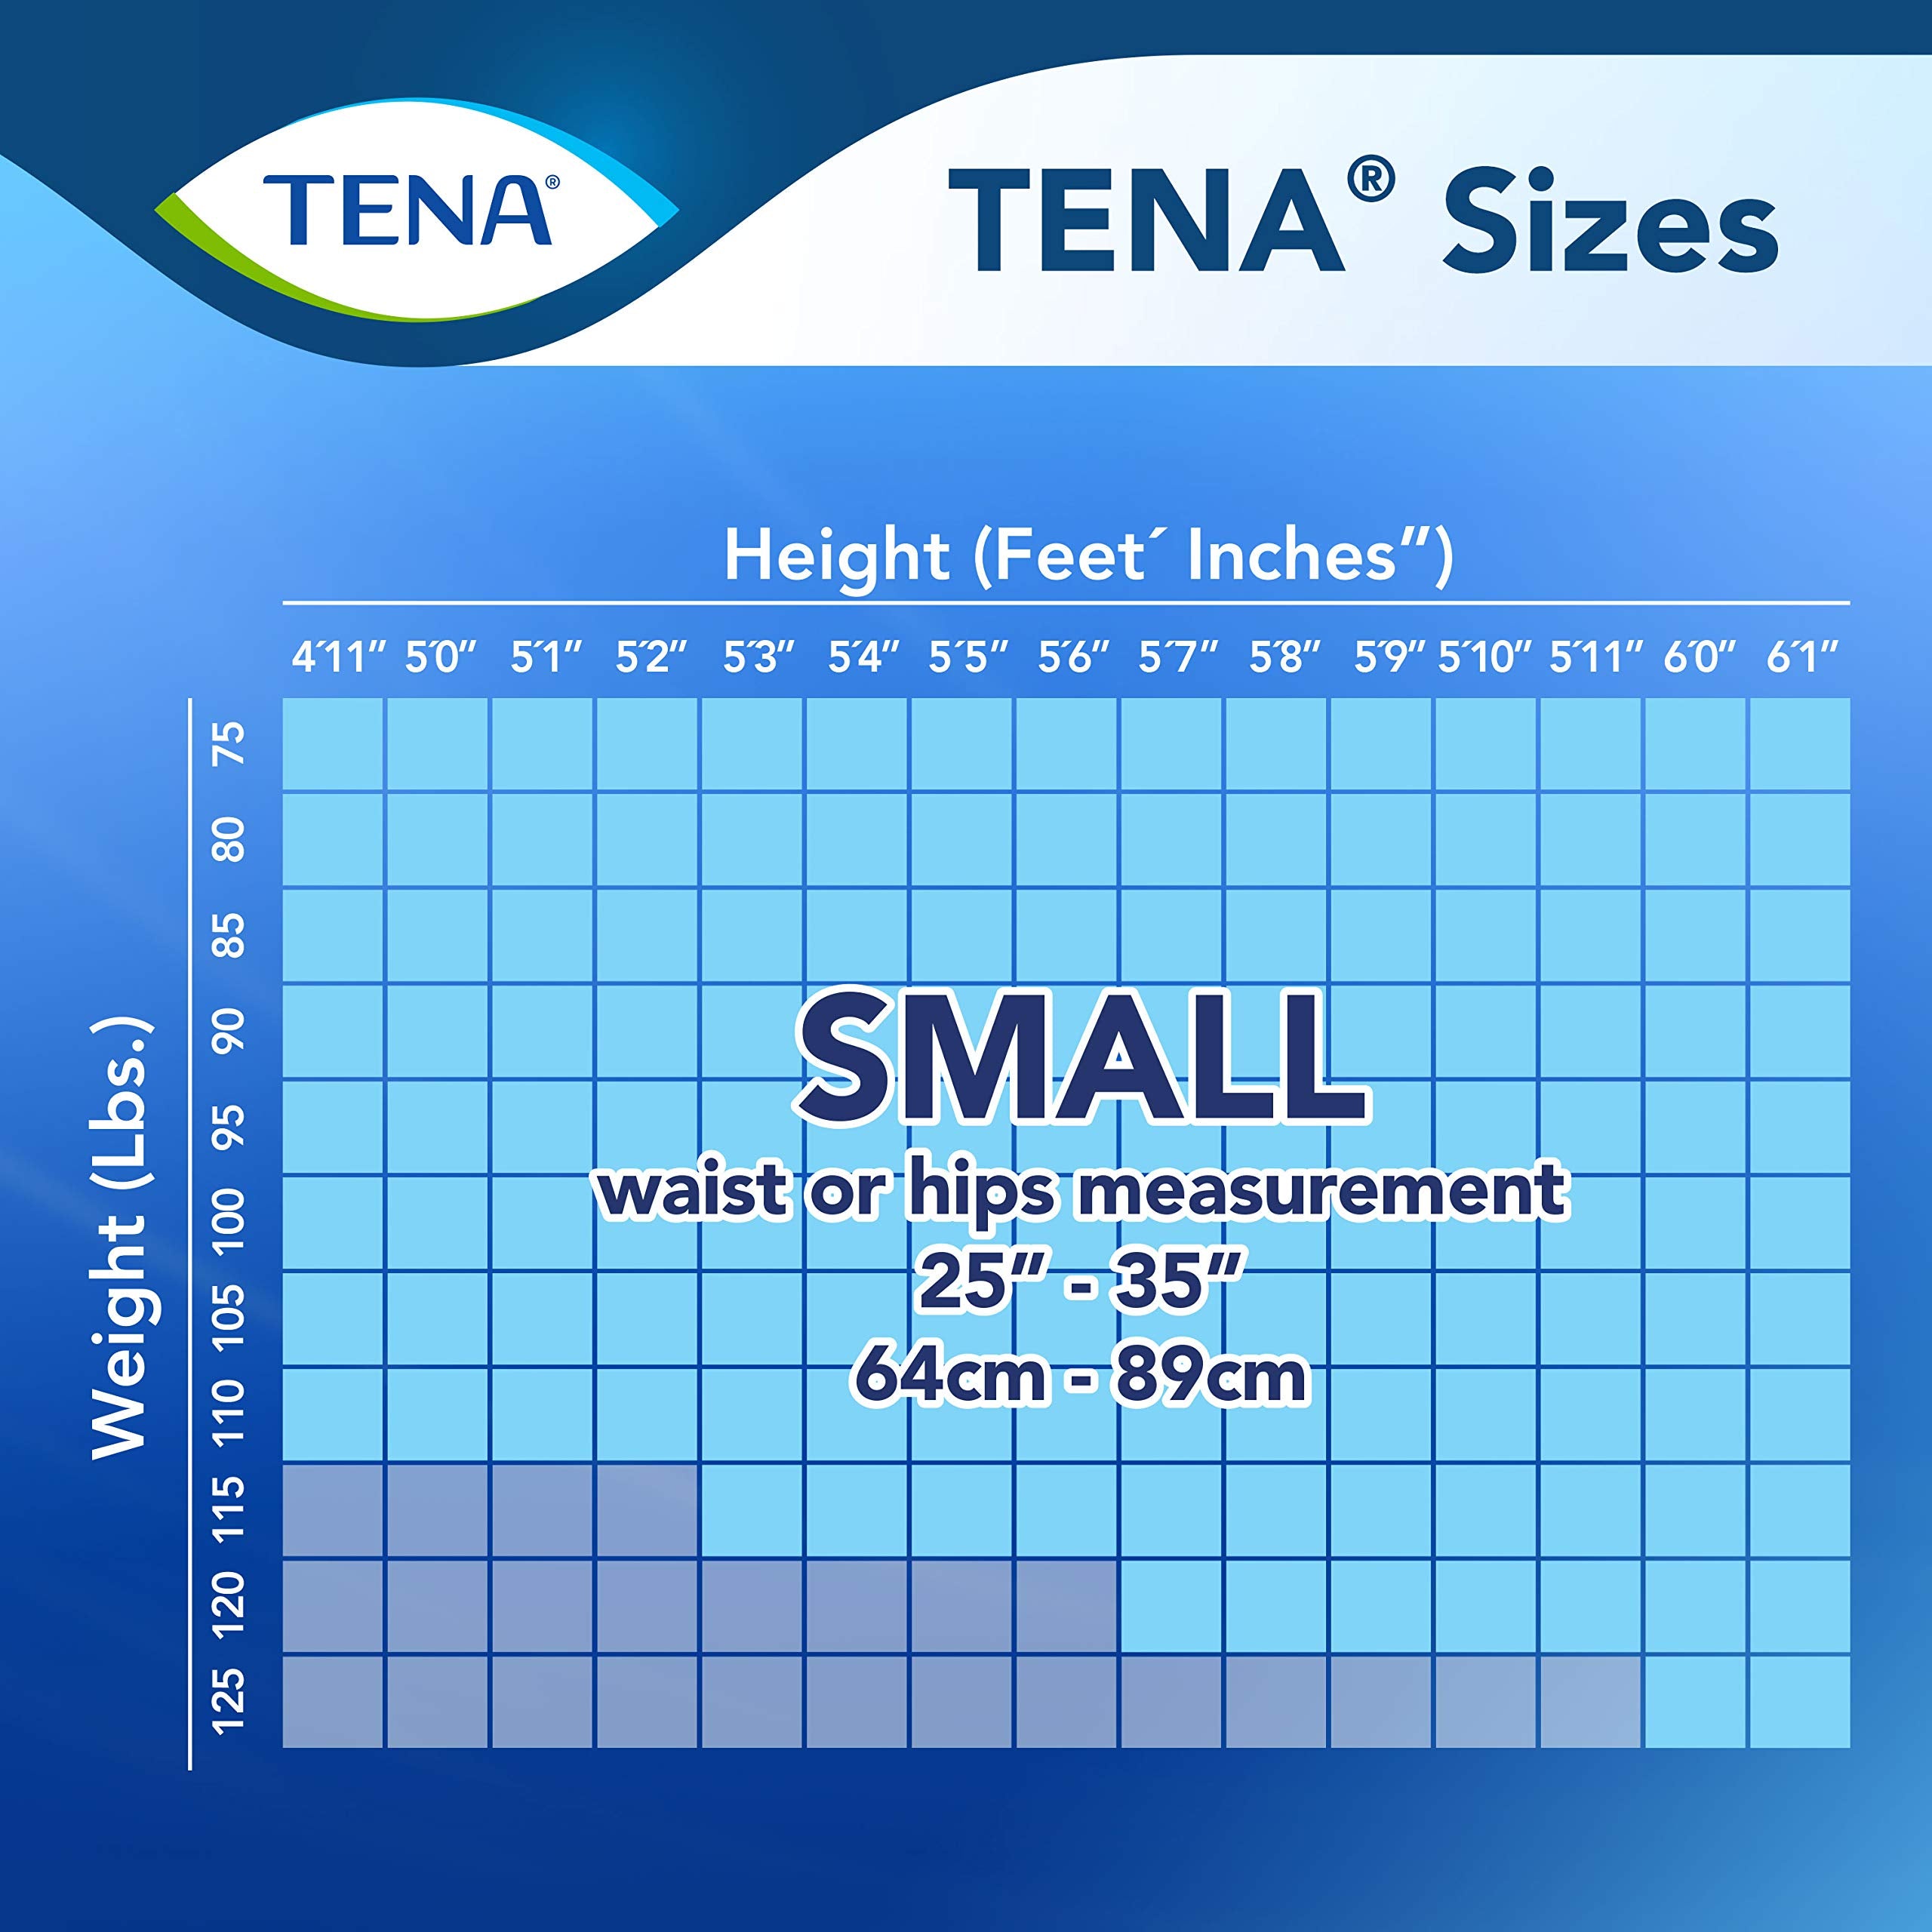 Tena Incontinence Underwear, overnight absorbency, Small, 13 Count